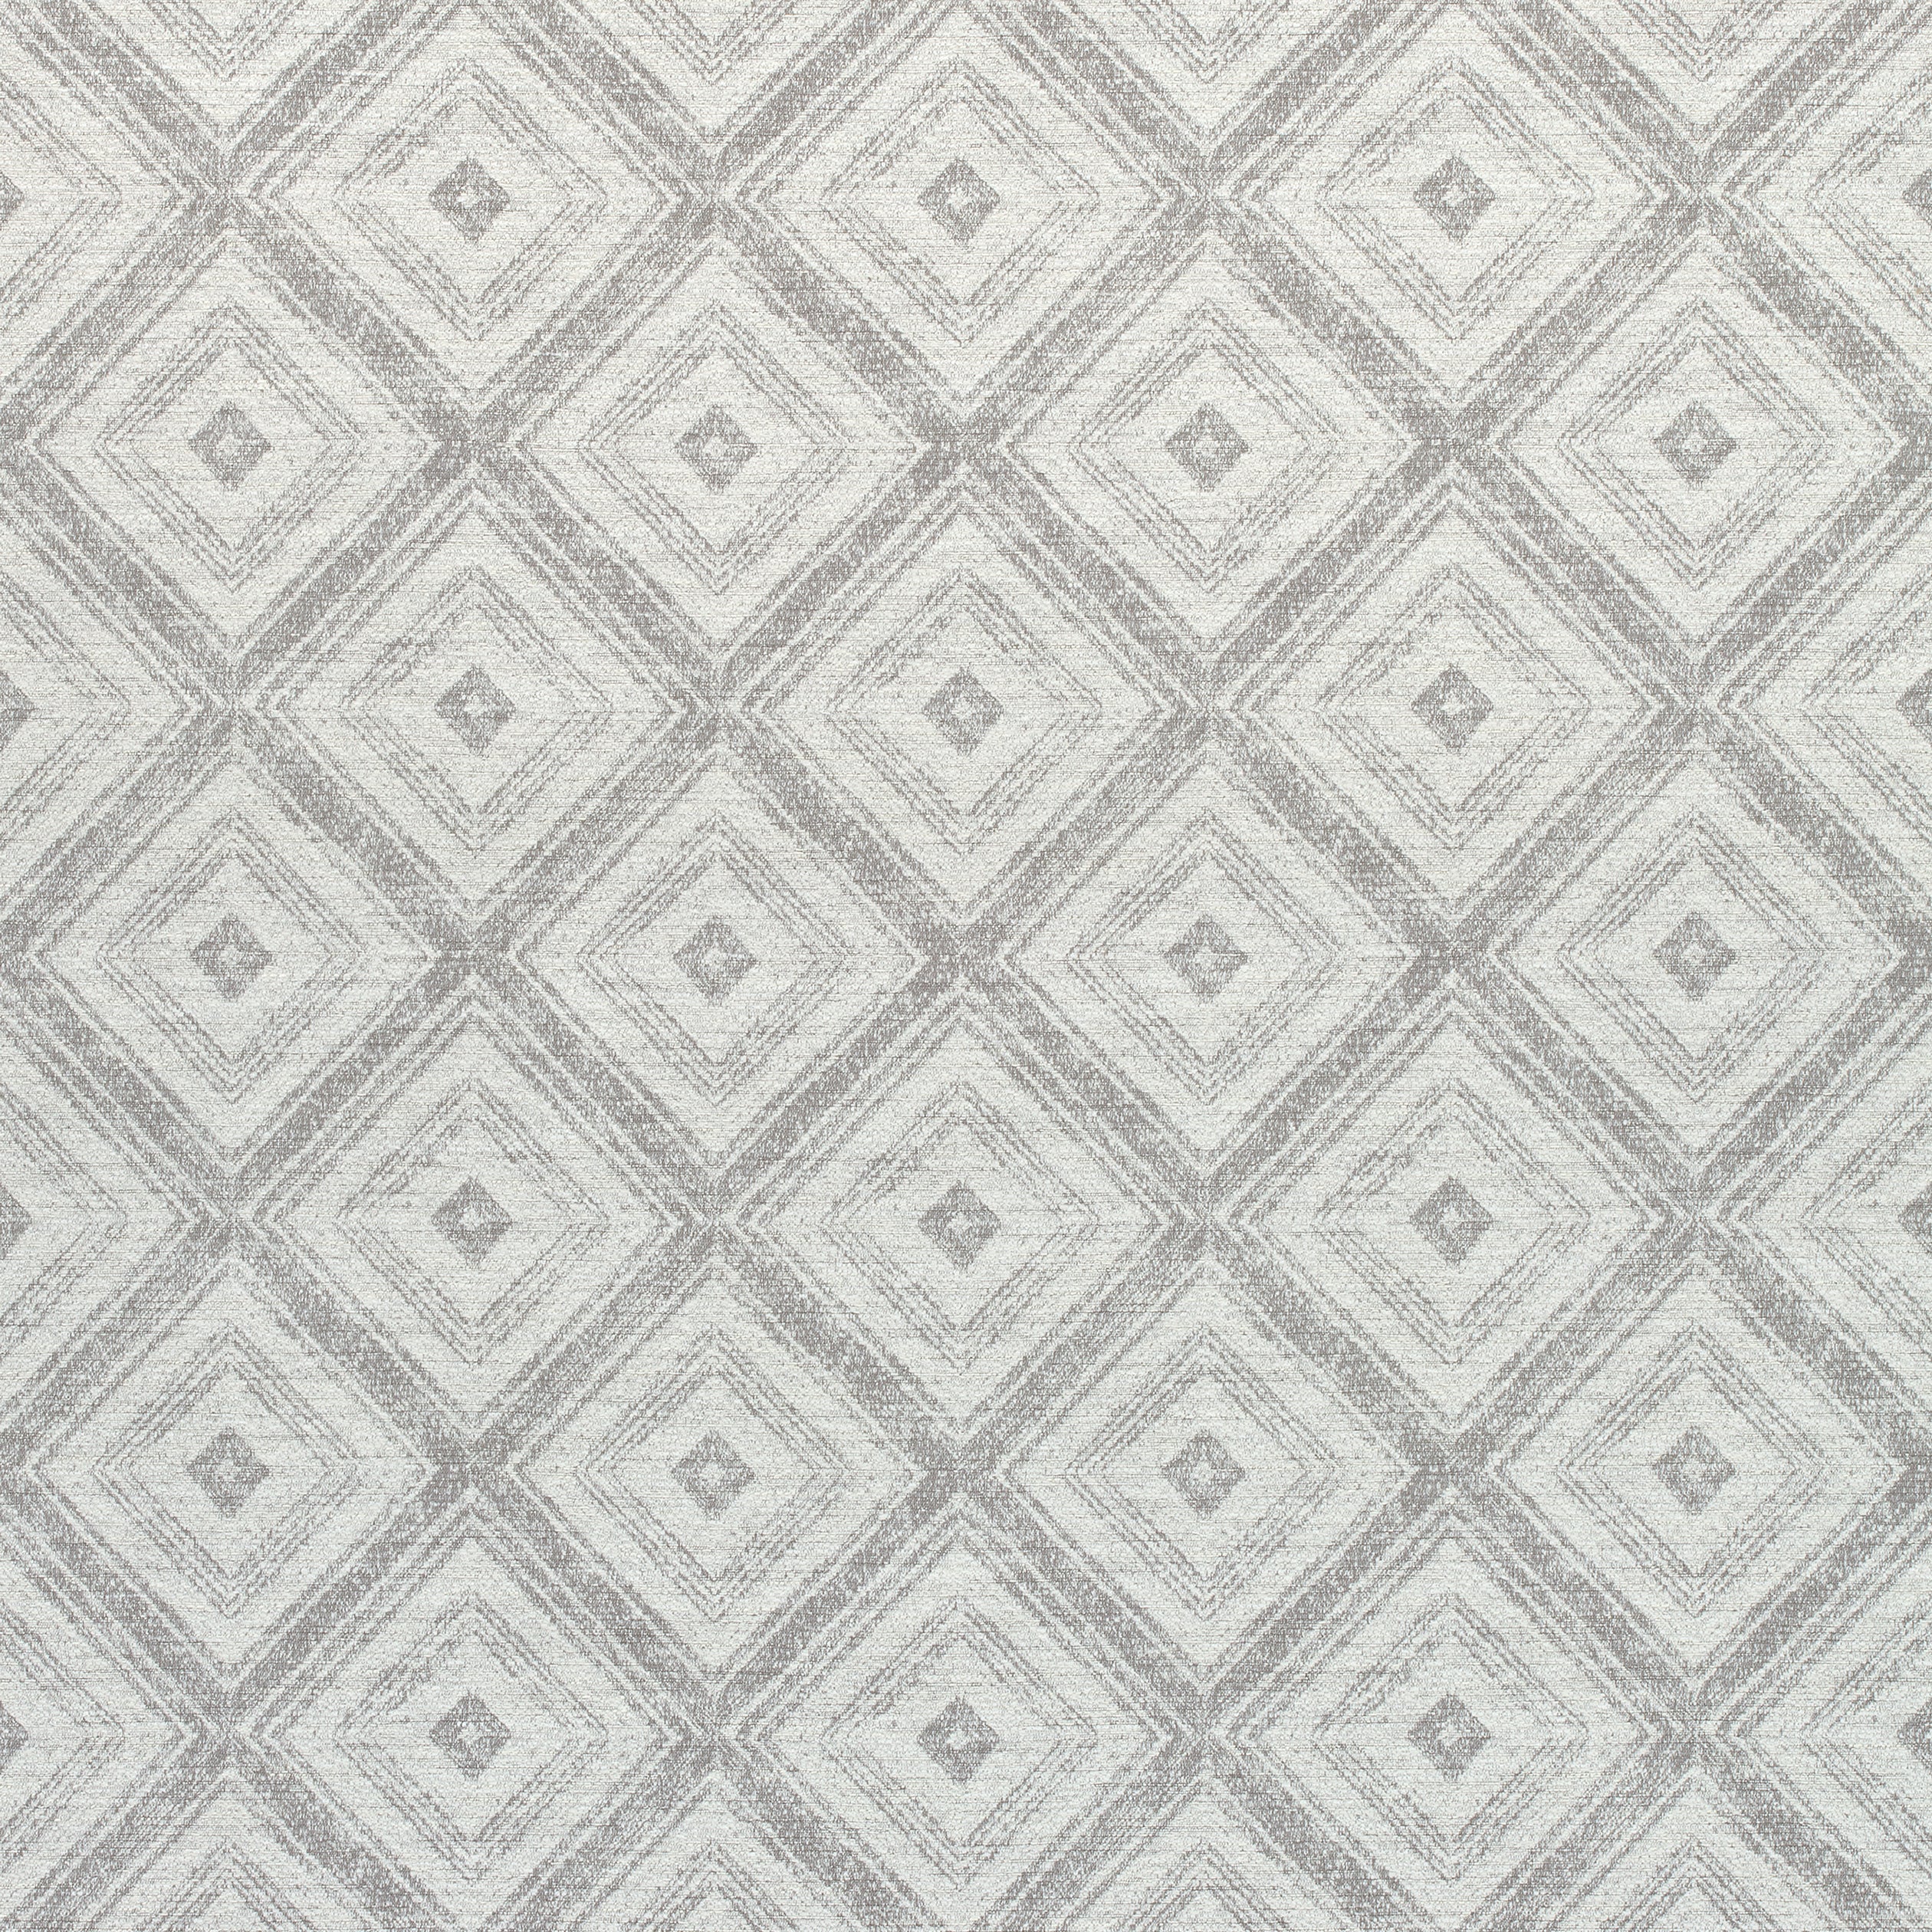 Ellison fabric in taupe color - pattern number W789128 - by Thibaut in the Reverie collection